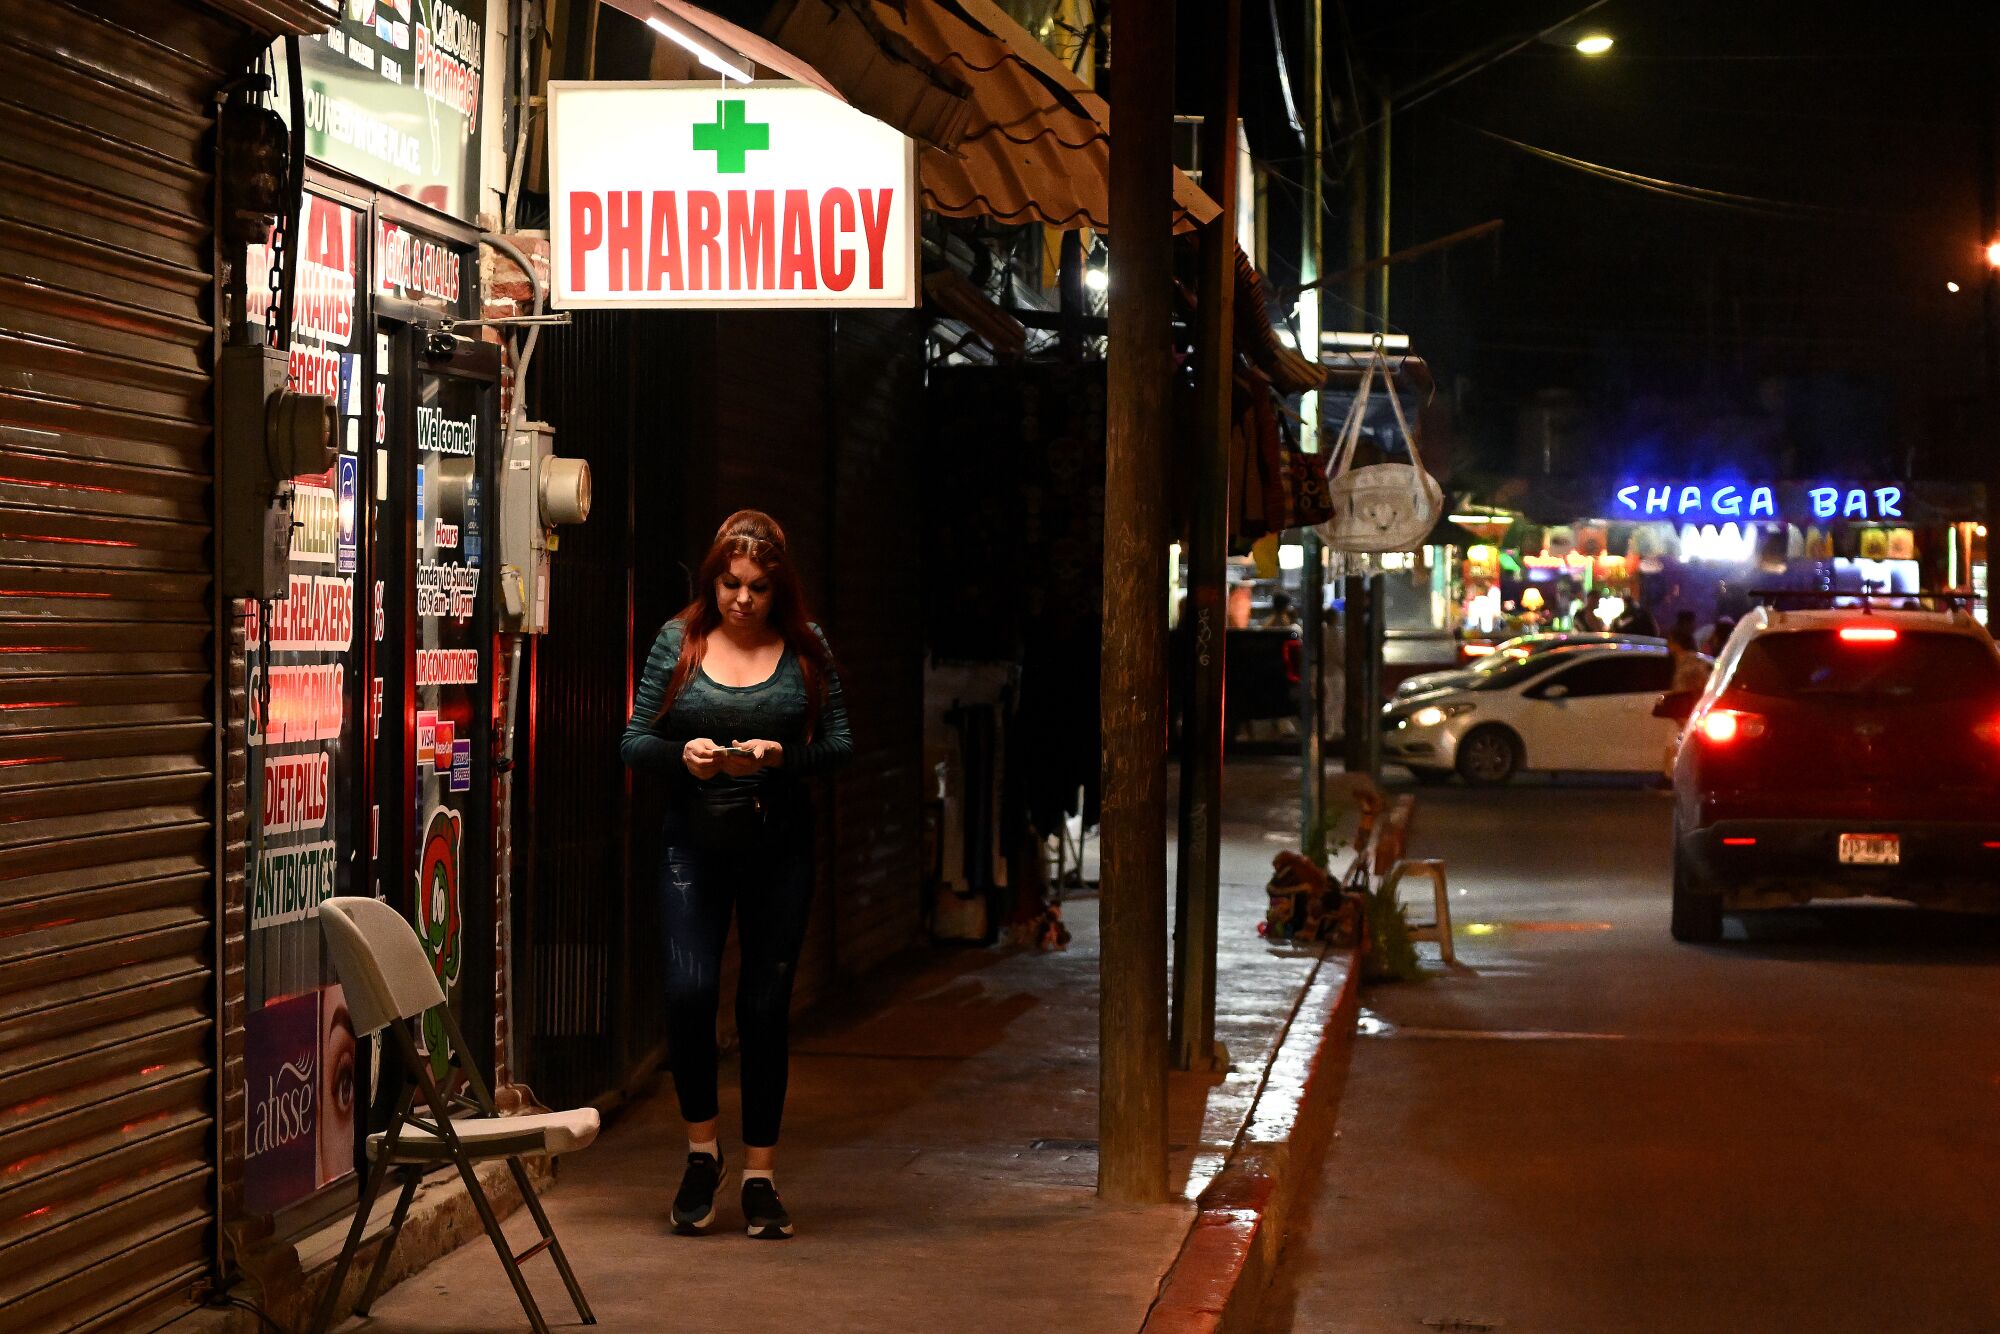 A woman passes by a store with a lighted "Pharmacy" sign at night while a car drives down the street next to her.